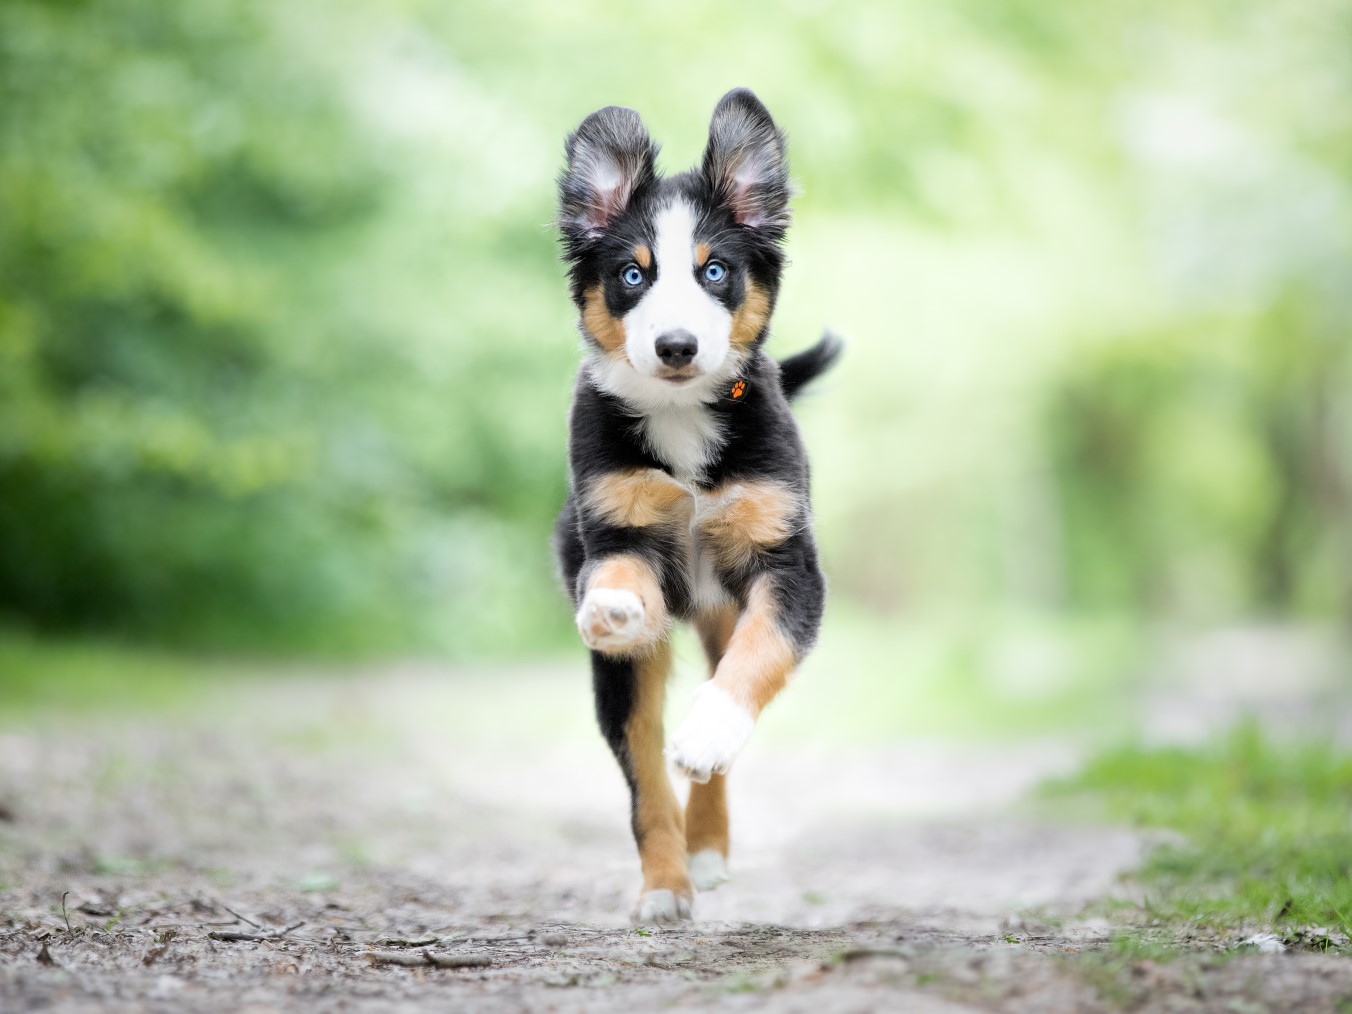 Bringing Home Your New Puppy! — The Puppy Academy